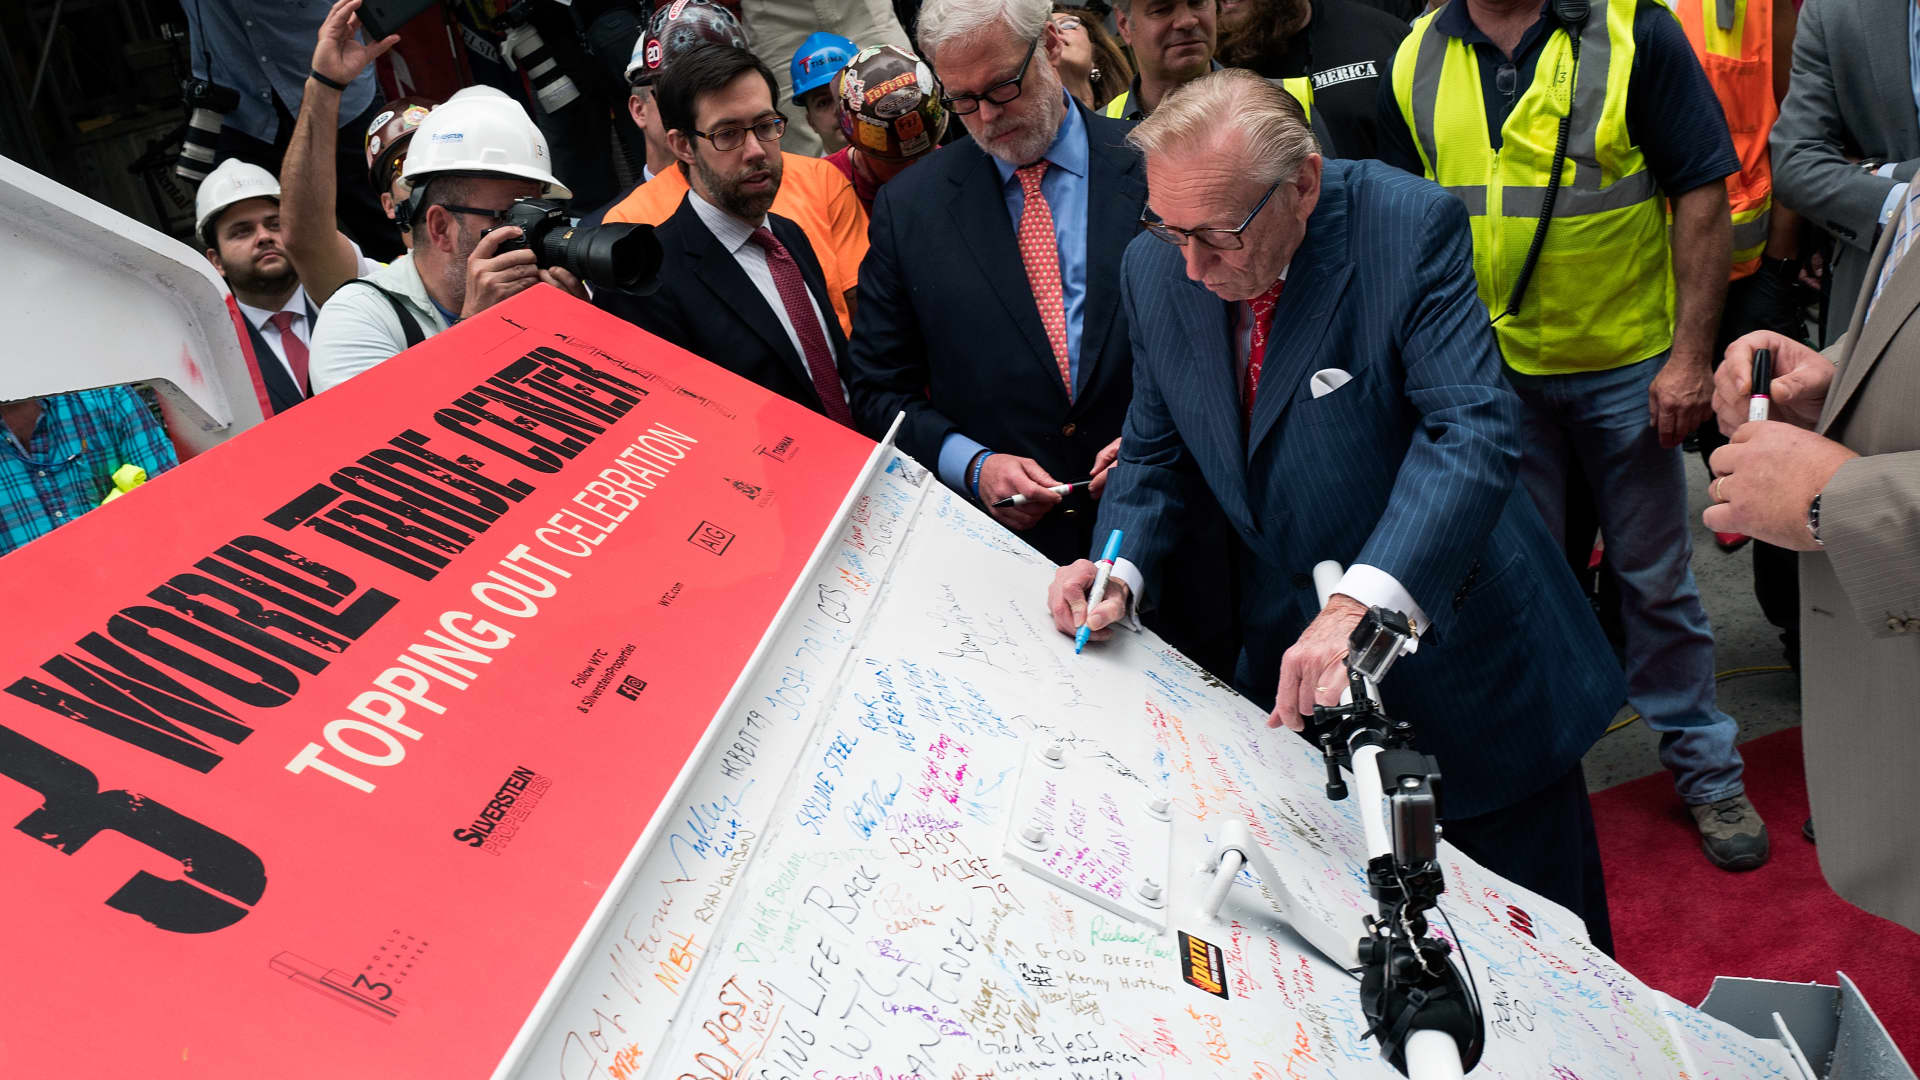 Real estate developer Larry Silverstein signs a concrete bucket before it is lifted to the top of the building during a topping off ceremony for 3 World Trade Center, June 23, 2016 in New York City. The ceremony marks the completion of the 2.5 billion dollar building's concrete core. 3 World Trade Center will stand 1,079-foot tall.